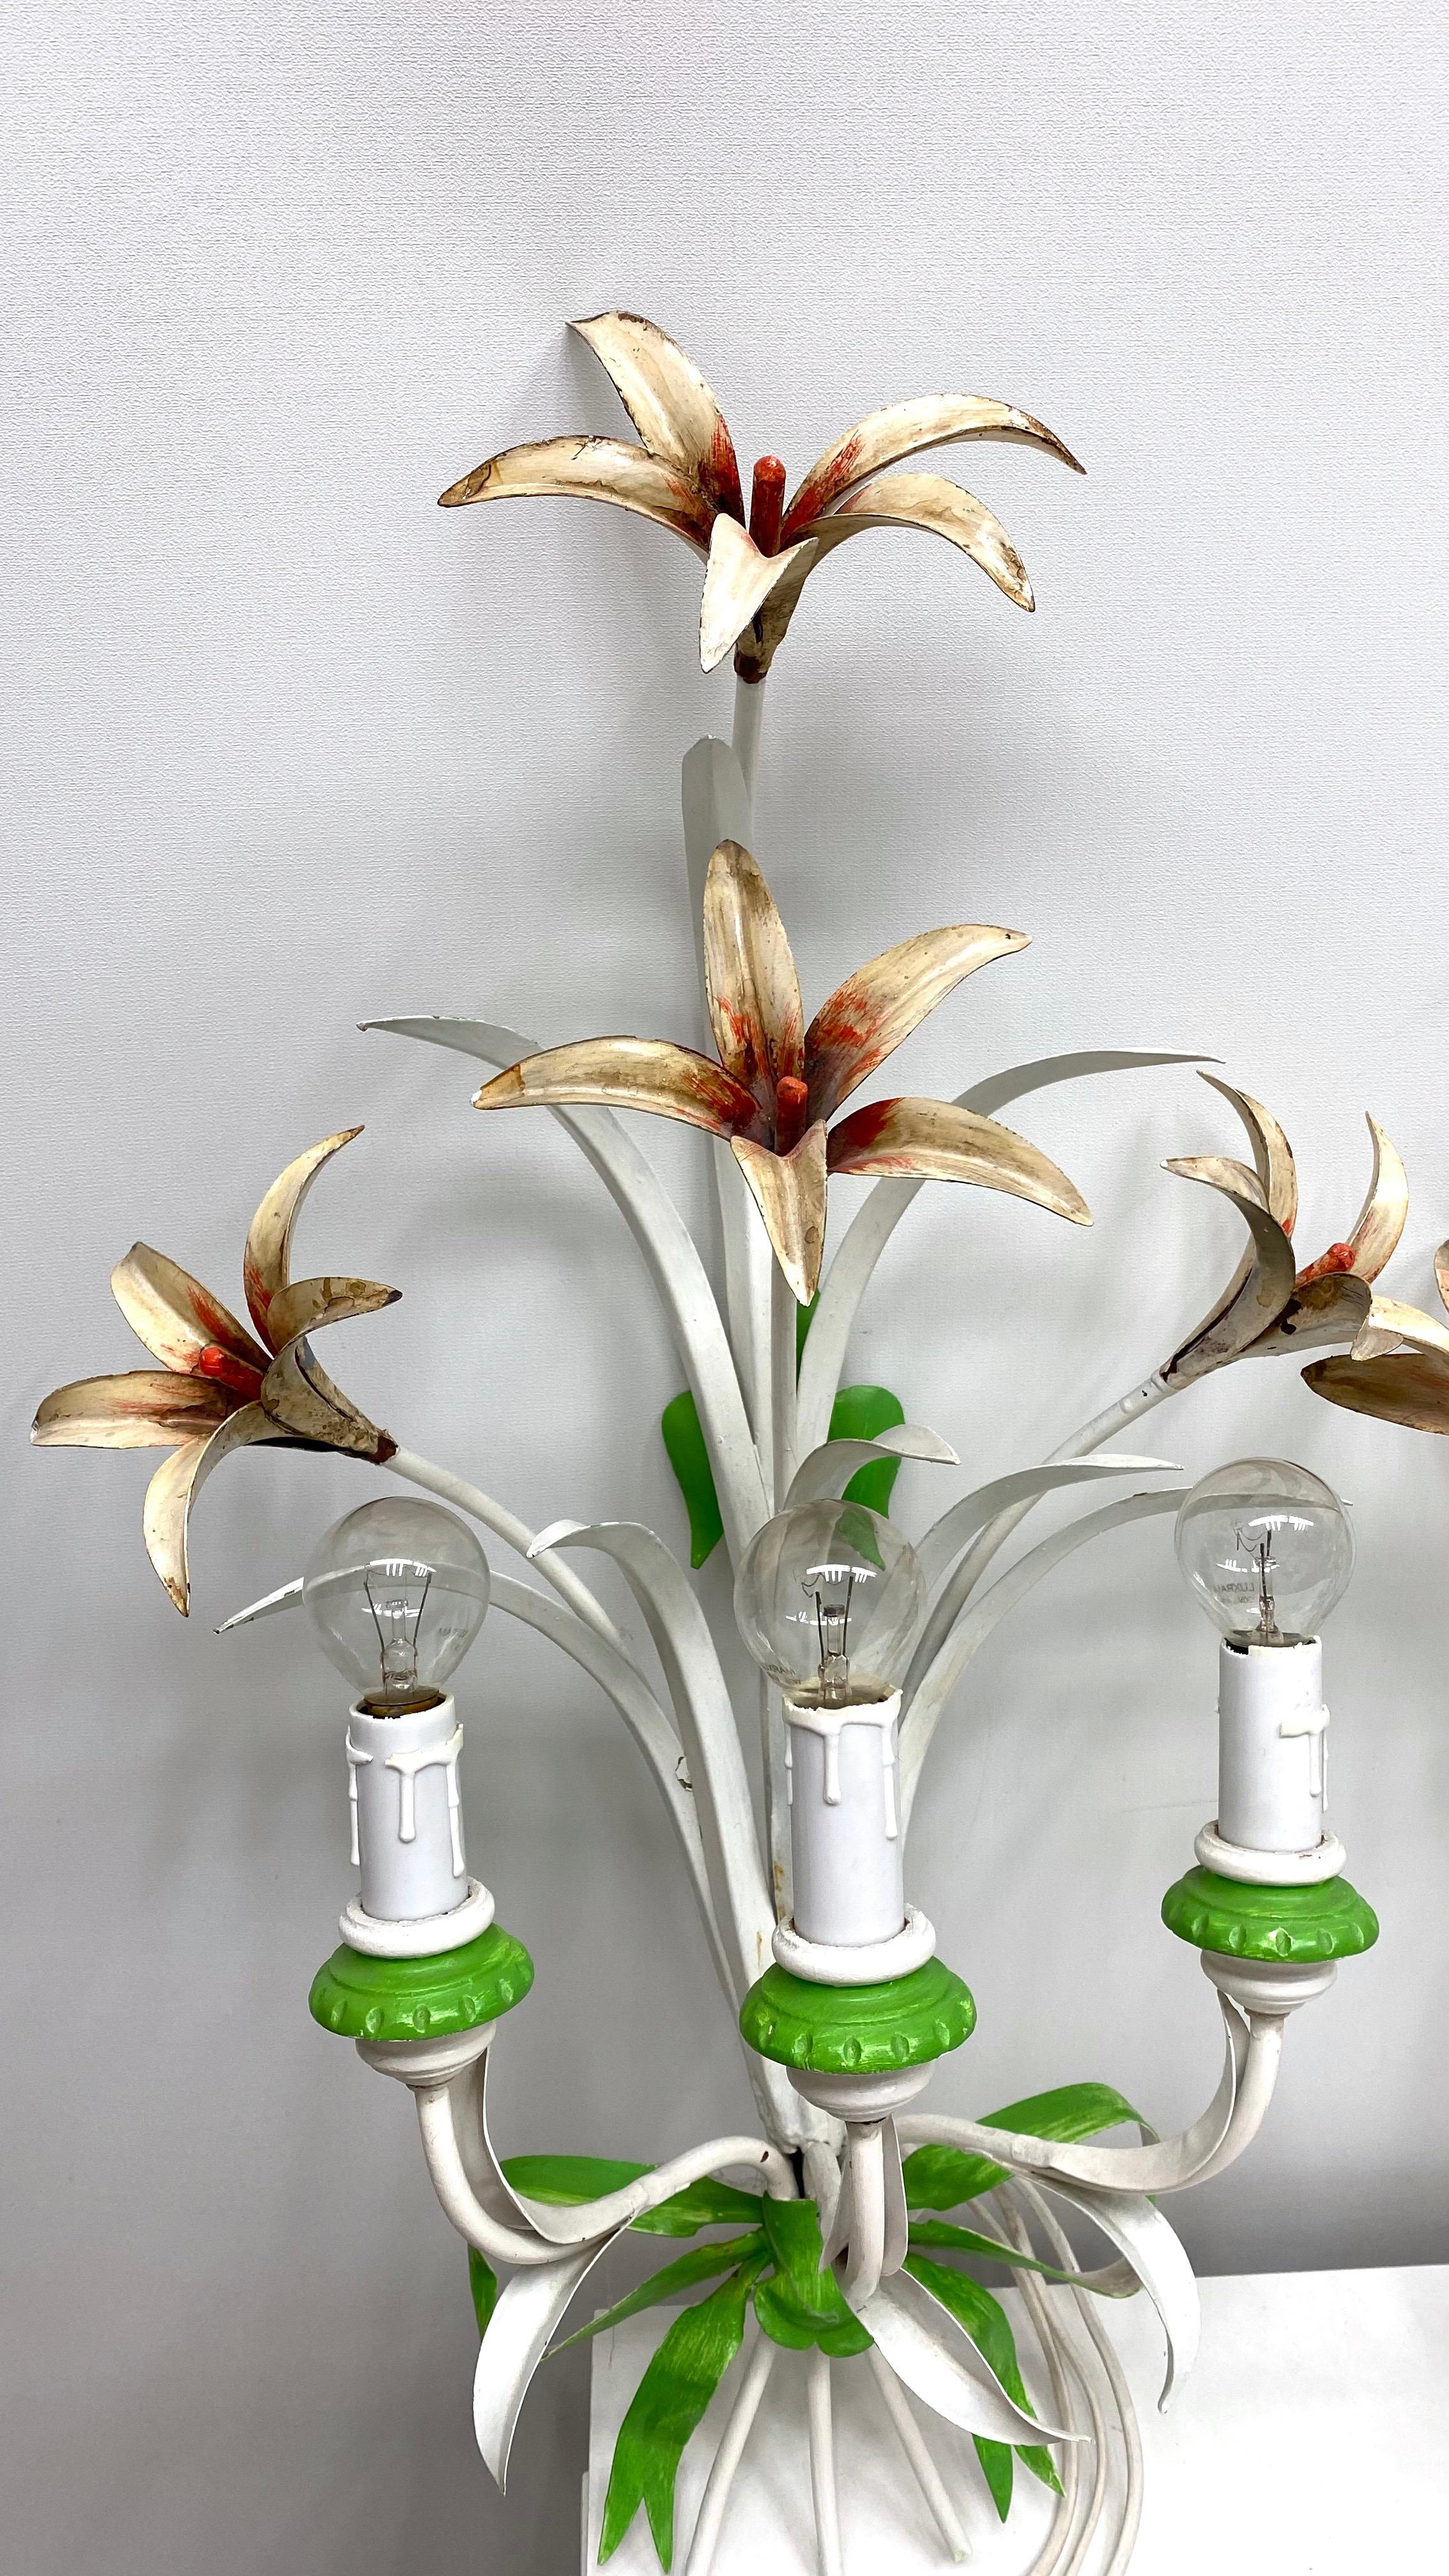 Set of Three Shabby Chic Flower Leaf Tole Sconces Polychrome Metal, 1960s, Italy For Sale 3